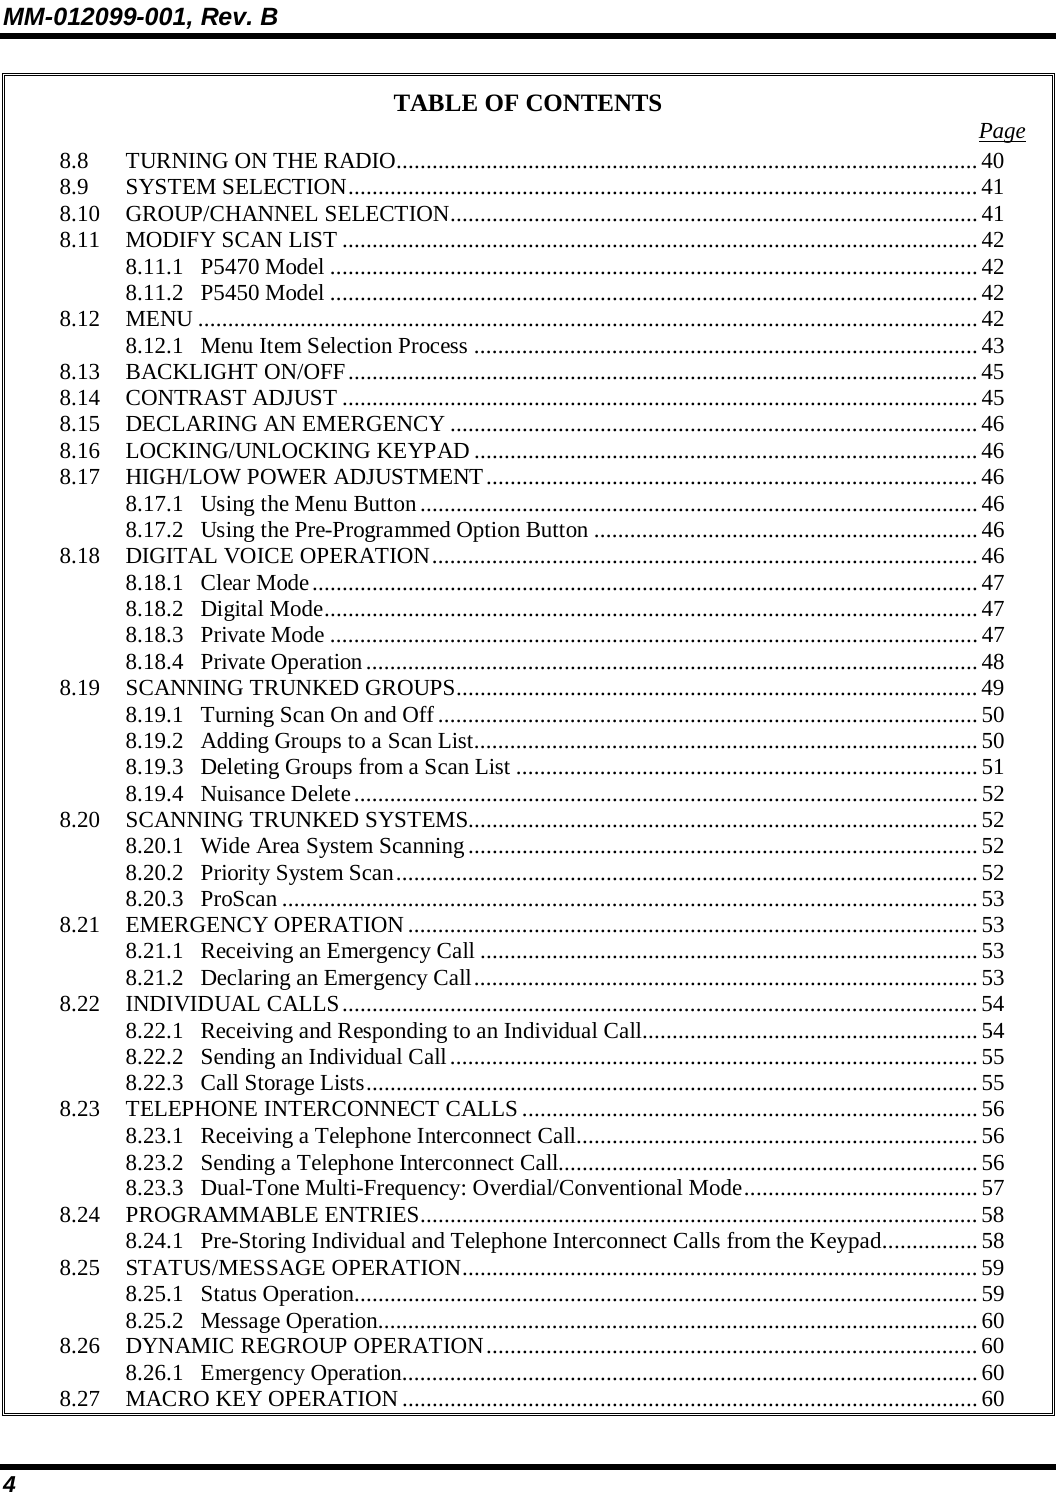 MM-012099-001, Rev. B 4 TABLE OF CONTENTS  Page 8.8 TURNING ON THE RADIO.................................................................................................40 8.9 SYSTEM SELECTION.........................................................................................................41 8.10 GROUP/CHANNEL SELECTION........................................................................................41 8.11 MODIFY SCAN LIST ..........................................................................................................42 8.11.1 P5470 Model ............................................................................................................ 42 8.11.2 P5450 Model ............................................................................................................ 42 8.12 MENU ..................................................................................................................................42 8.12.1 Menu Item Selection Process ....................................................................................43 8.13 BACKLIGHT ON/OFF......................................................................................................... 45 8.14 CONTRAST ADJUST .......................................................................................................... 45 8.15 DECLARING AN EMERGENCY ........................................................................................ 46 8.16 LOCKING/UNLOCKING KEYPAD ....................................................................................46 8.17 HIGH/LOW POWER ADJUSTMENT..................................................................................46 8.17.1 Using the Menu Button.............................................................................................46 8.17.2 Using the Pre-Programmed Option Button ................................................................46 8.18 DIGITAL VOICE OPERATION...........................................................................................46 8.18.1 Clear Mode............................................................................................................... 47 8.18.2 Digital Mode............................................................................................................. 47 8.18.3 Private Mode ............................................................................................................47 8.18.4 Private Operation...................................................................................................... 48 8.19 SCANNING TRUNKED GROUPS.......................................................................................49 8.19.1 Turning Scan On and Off.......................................................................................... 50 8.19.2 Adding Groups to a Scan List....................................................................................50 8.19.3 Deleting Groups from a Scan List .............................................................................51 8.19.4 Nuisance Delete........................................................................................................52 8.20 SCANNING TRUNKED SYSTEMS.....................................................................................52 8.20.1 Wide Area System Scanning.....................................................................................52 8.20.2 Priority System Scan................................................................................................. 52 8.20.3 ProScan ....................................................................................................................53 8.21 EMERGENCY OPERATION...............................................................................................53 8.21.1 Receiving an Emergency Call ...................................................................................53 8.21.2 Declaring an Emergency Call.................................................................................... 53 8.22 INDIVIDUAL CALLS.......................................................................................................... 54 8.22.1 Receiving and Responding to an Individual Call........................................................54 8.22.2 Sending an Individual Call........................................................................................ 55 8.22.3 Call Storage Lists......................................................................................................55 8.23 TELEPHONE INTERCONNECT CALLS ............................................................................56 8.23.1 Receiving a Telephone Interconnect Call...................................................................56 8.23.2 Sending a Telephone Interconnect Call......................................................................56 8.23.3 Dual-Tone Multi-Frequency: Overdial/Conventional Mode....................................... 57 8.24 PROGRAMMABLE ENTRIES............................................................................................. 58 8.24.1 Pre-Storing Individual and Telephone Interconnect Calls from the Keypad................ 58 8.25 STATUS/MESSAGE OPERATION......................................................................................59 8.25.1 Status Operation........................................................................................................59 8.25.2 Message Operation....................................................................................................60 8.26 DYNAMIC REGROUP OPERATION..................................................................................60 8.26.1 Emergency Operation................................................................................................60 8.27 MACRO KEY OPERATION................................................................................................60 